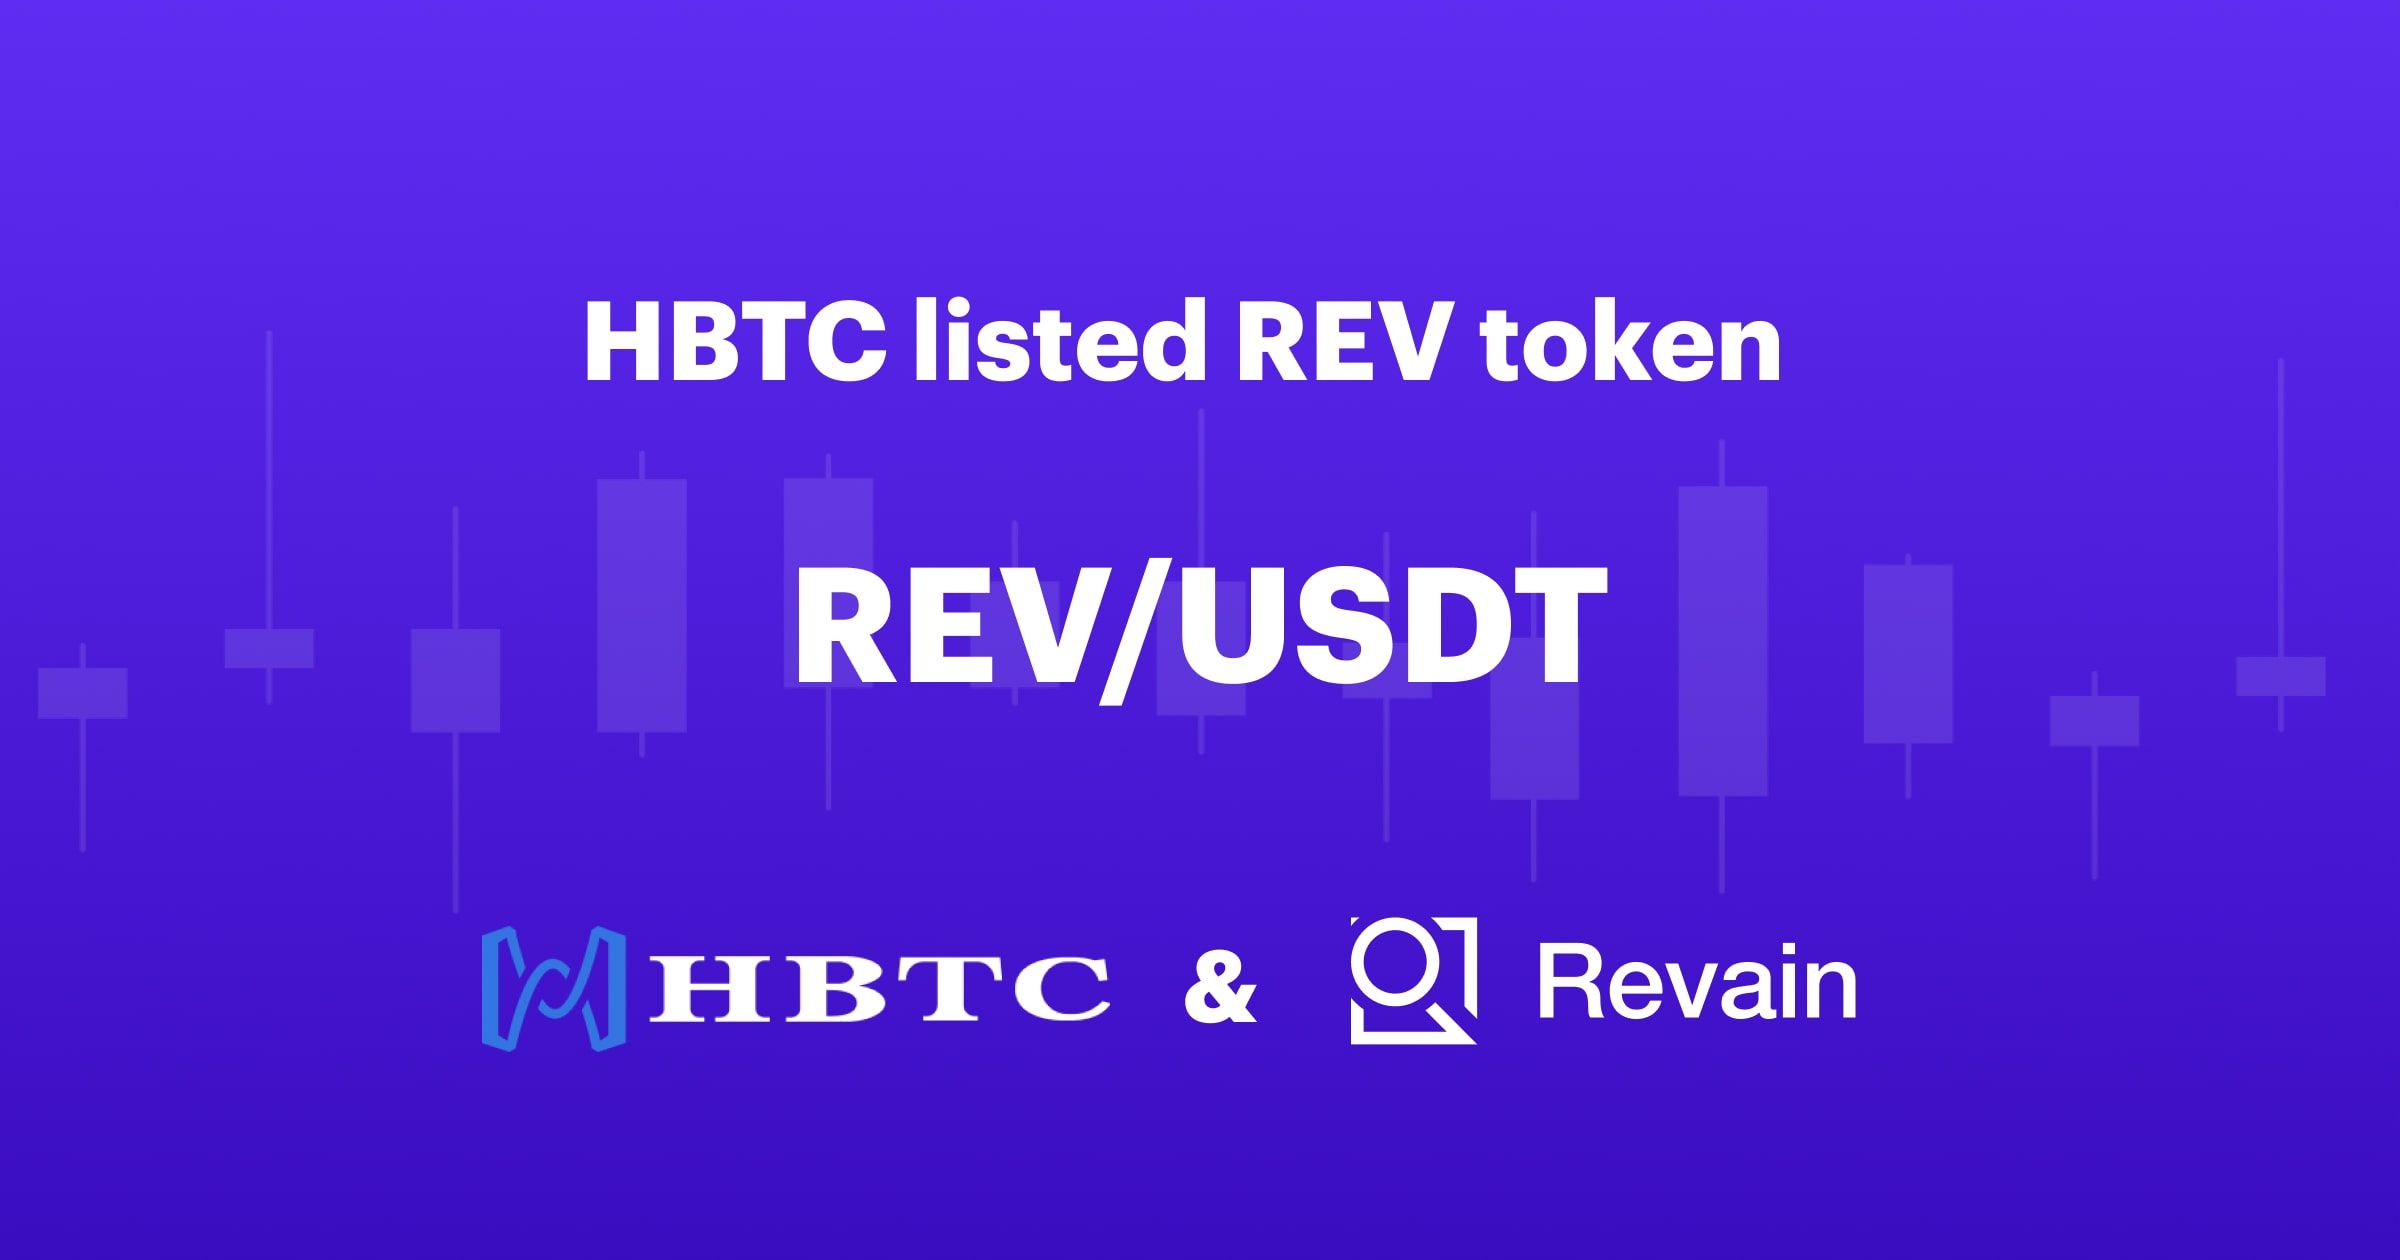 Article Revain is listed on the HBTC exchange